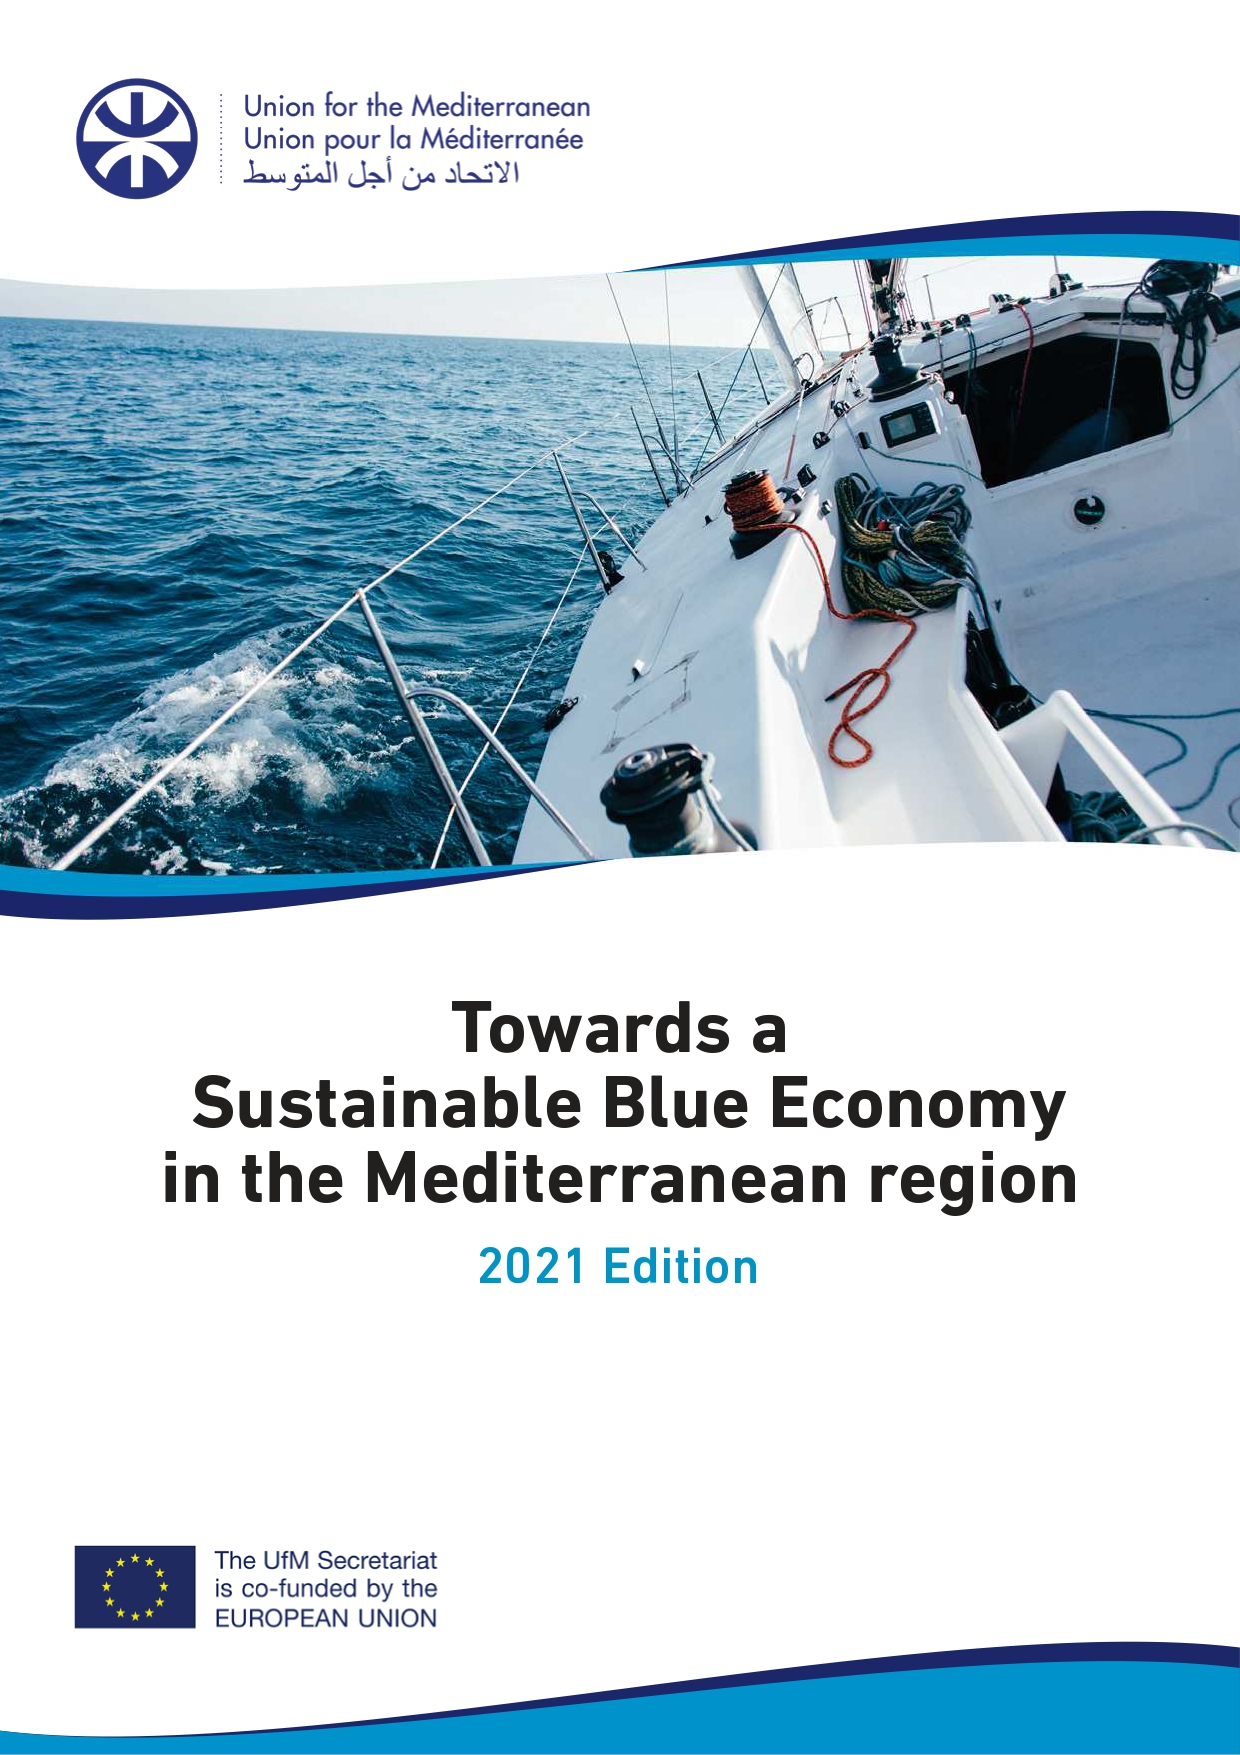 Towards a Sustainable Blue Economy in the Mediterranean region